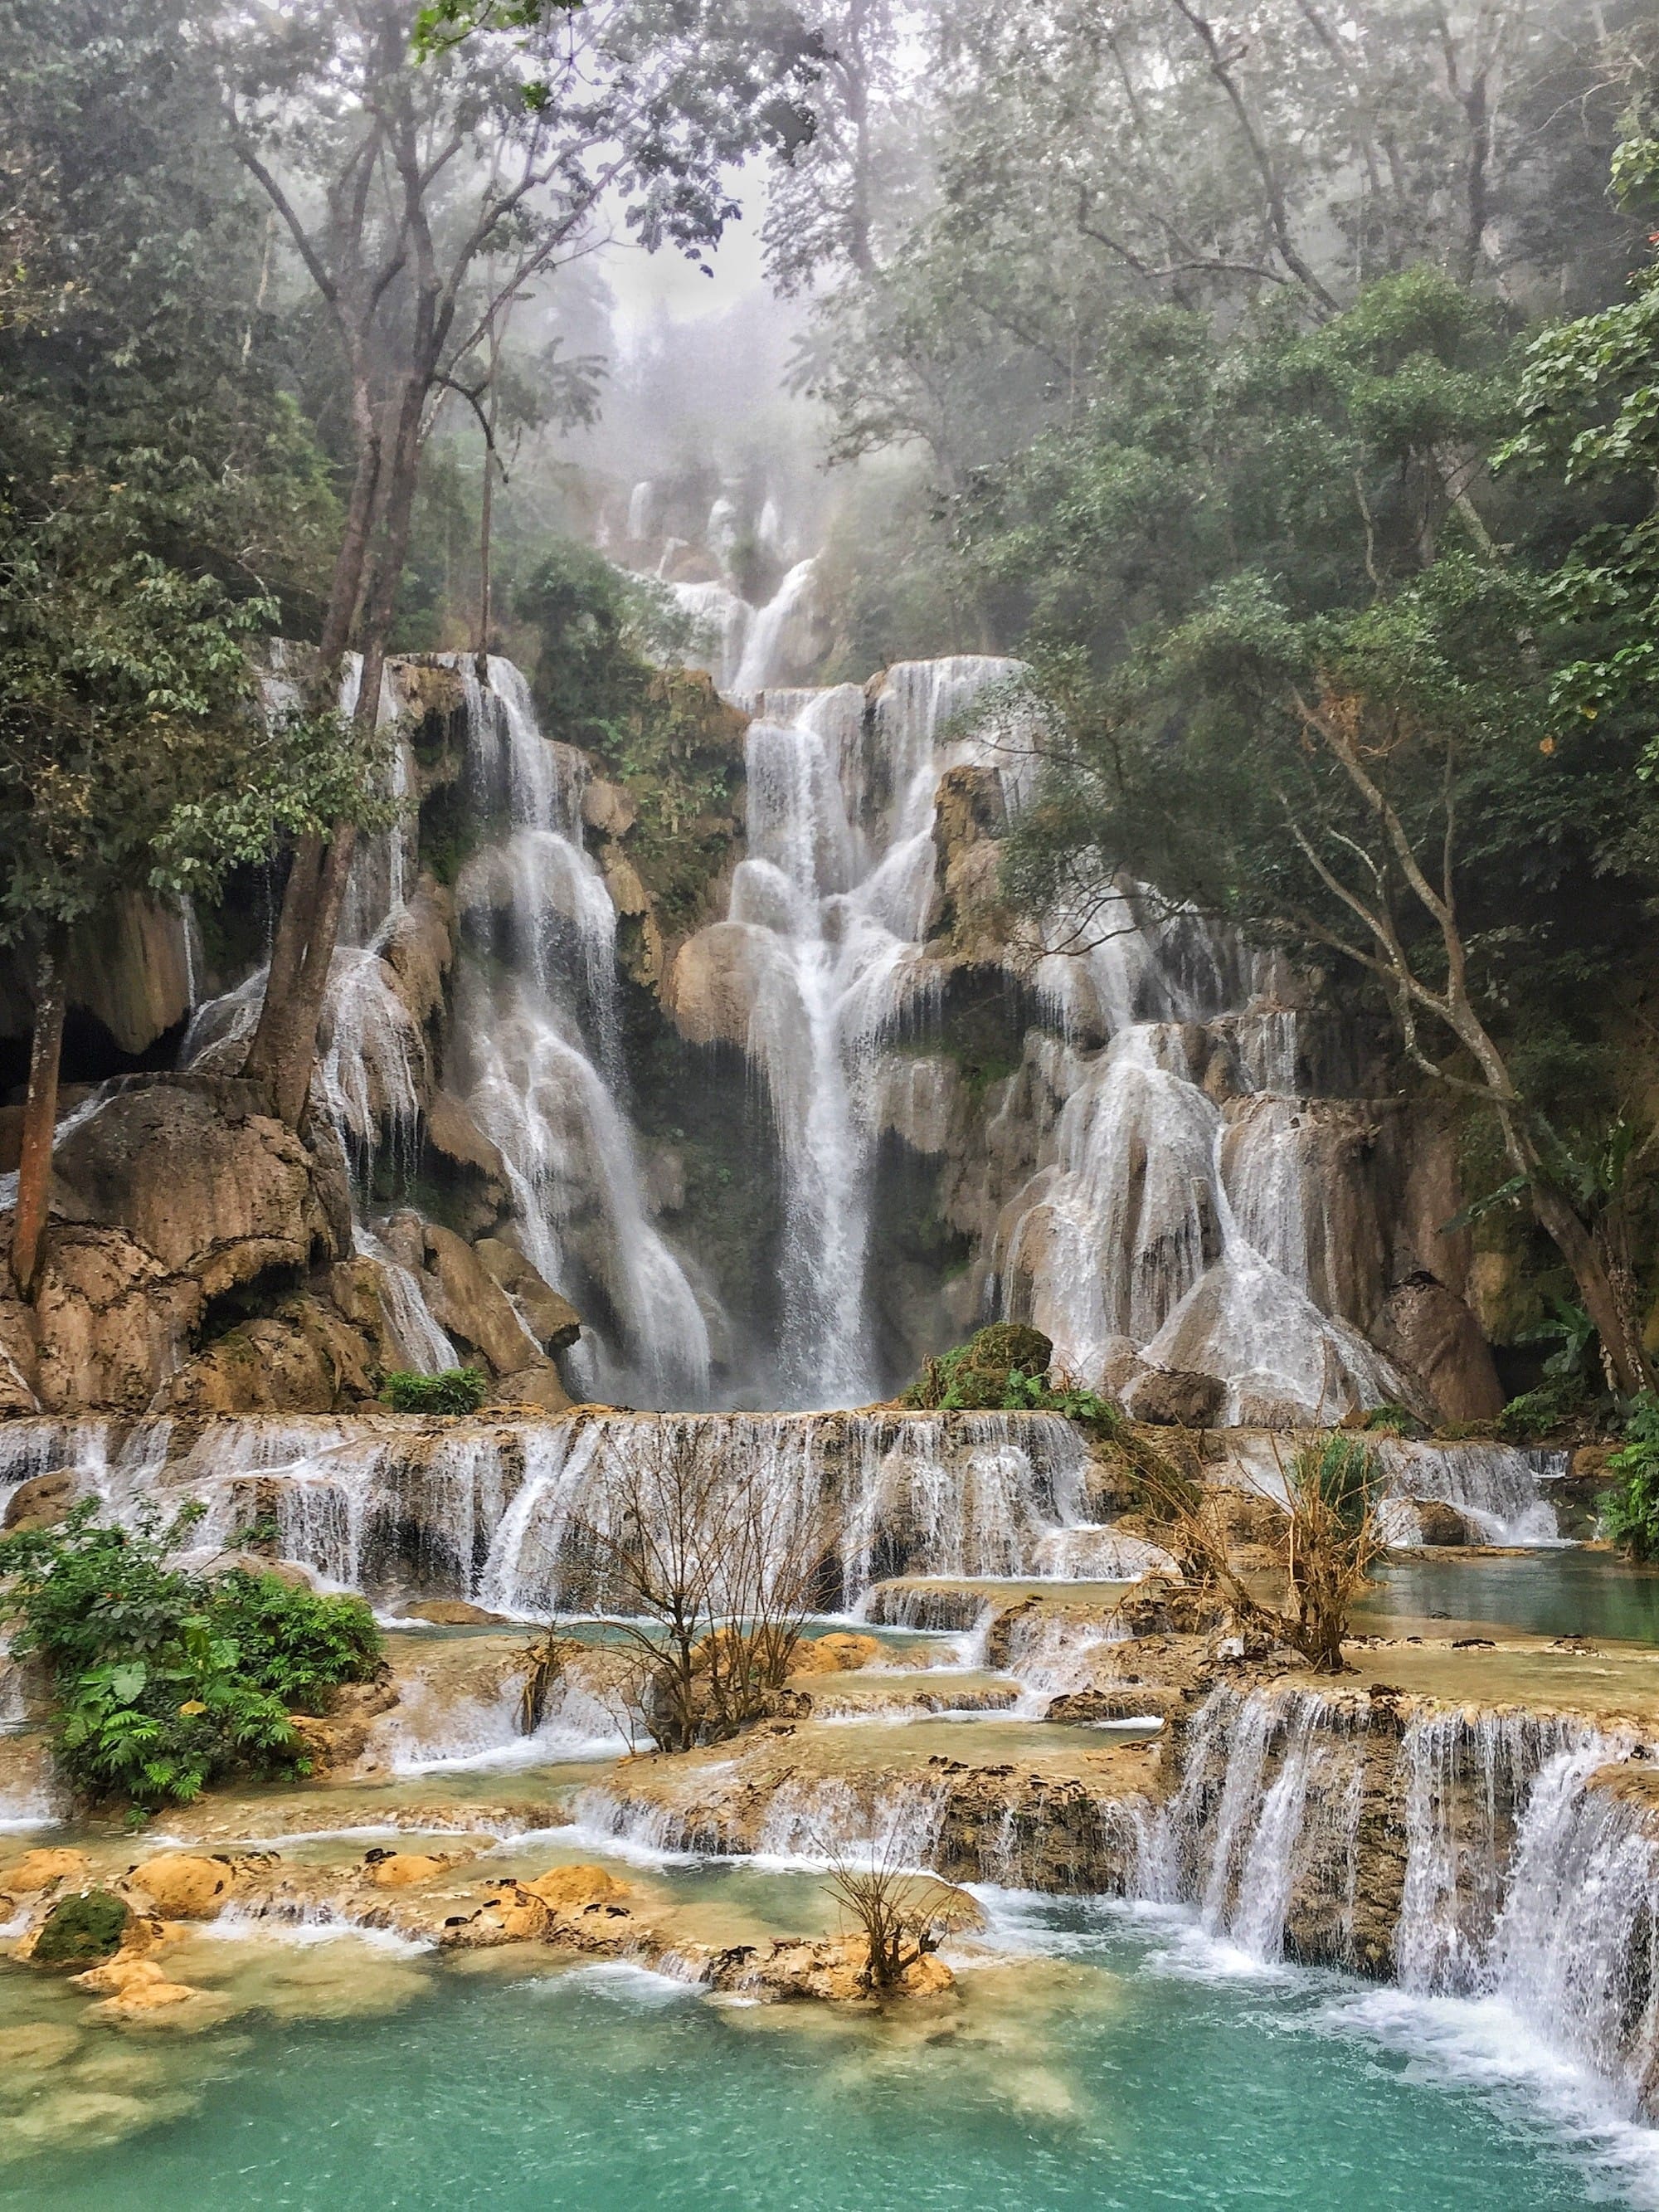 anscendent Trails: From Yunnan's Splendors To Luang Prabang's Tranquility